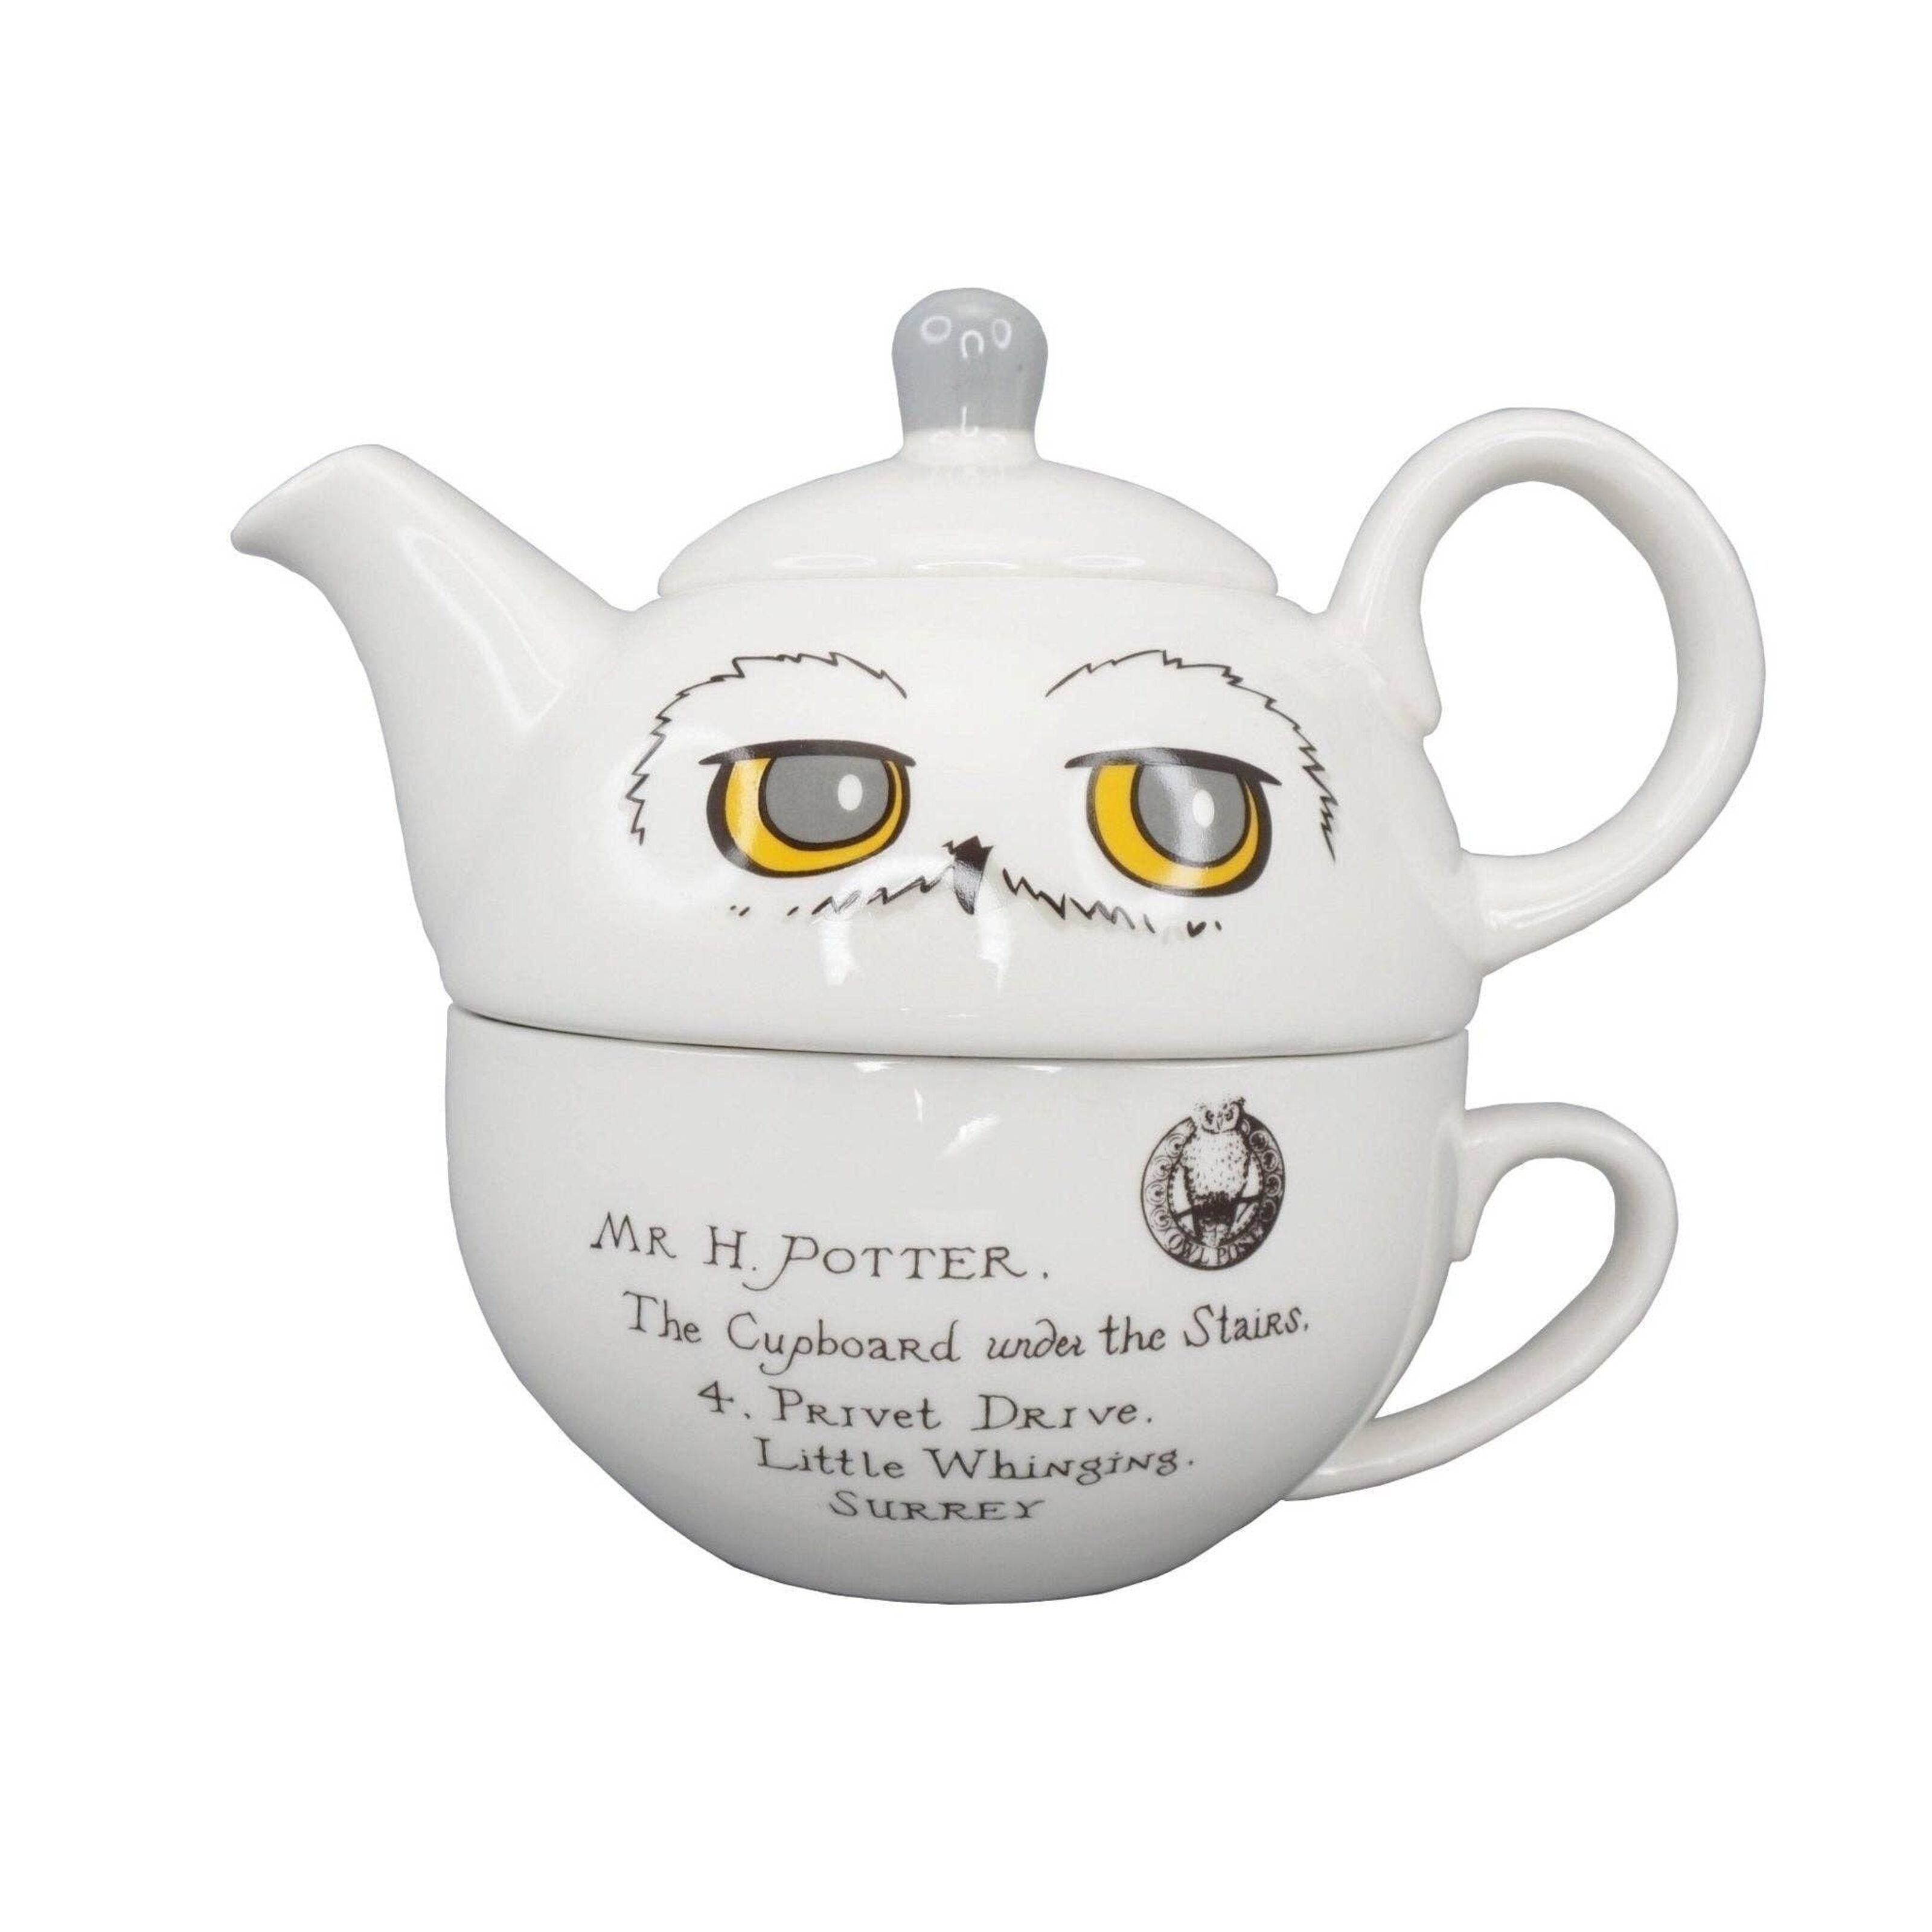 Harry Potter teapot with gryffindorscarf, accio tea, tea for one, gift for Harry  Potter fan, reader, tea drinker